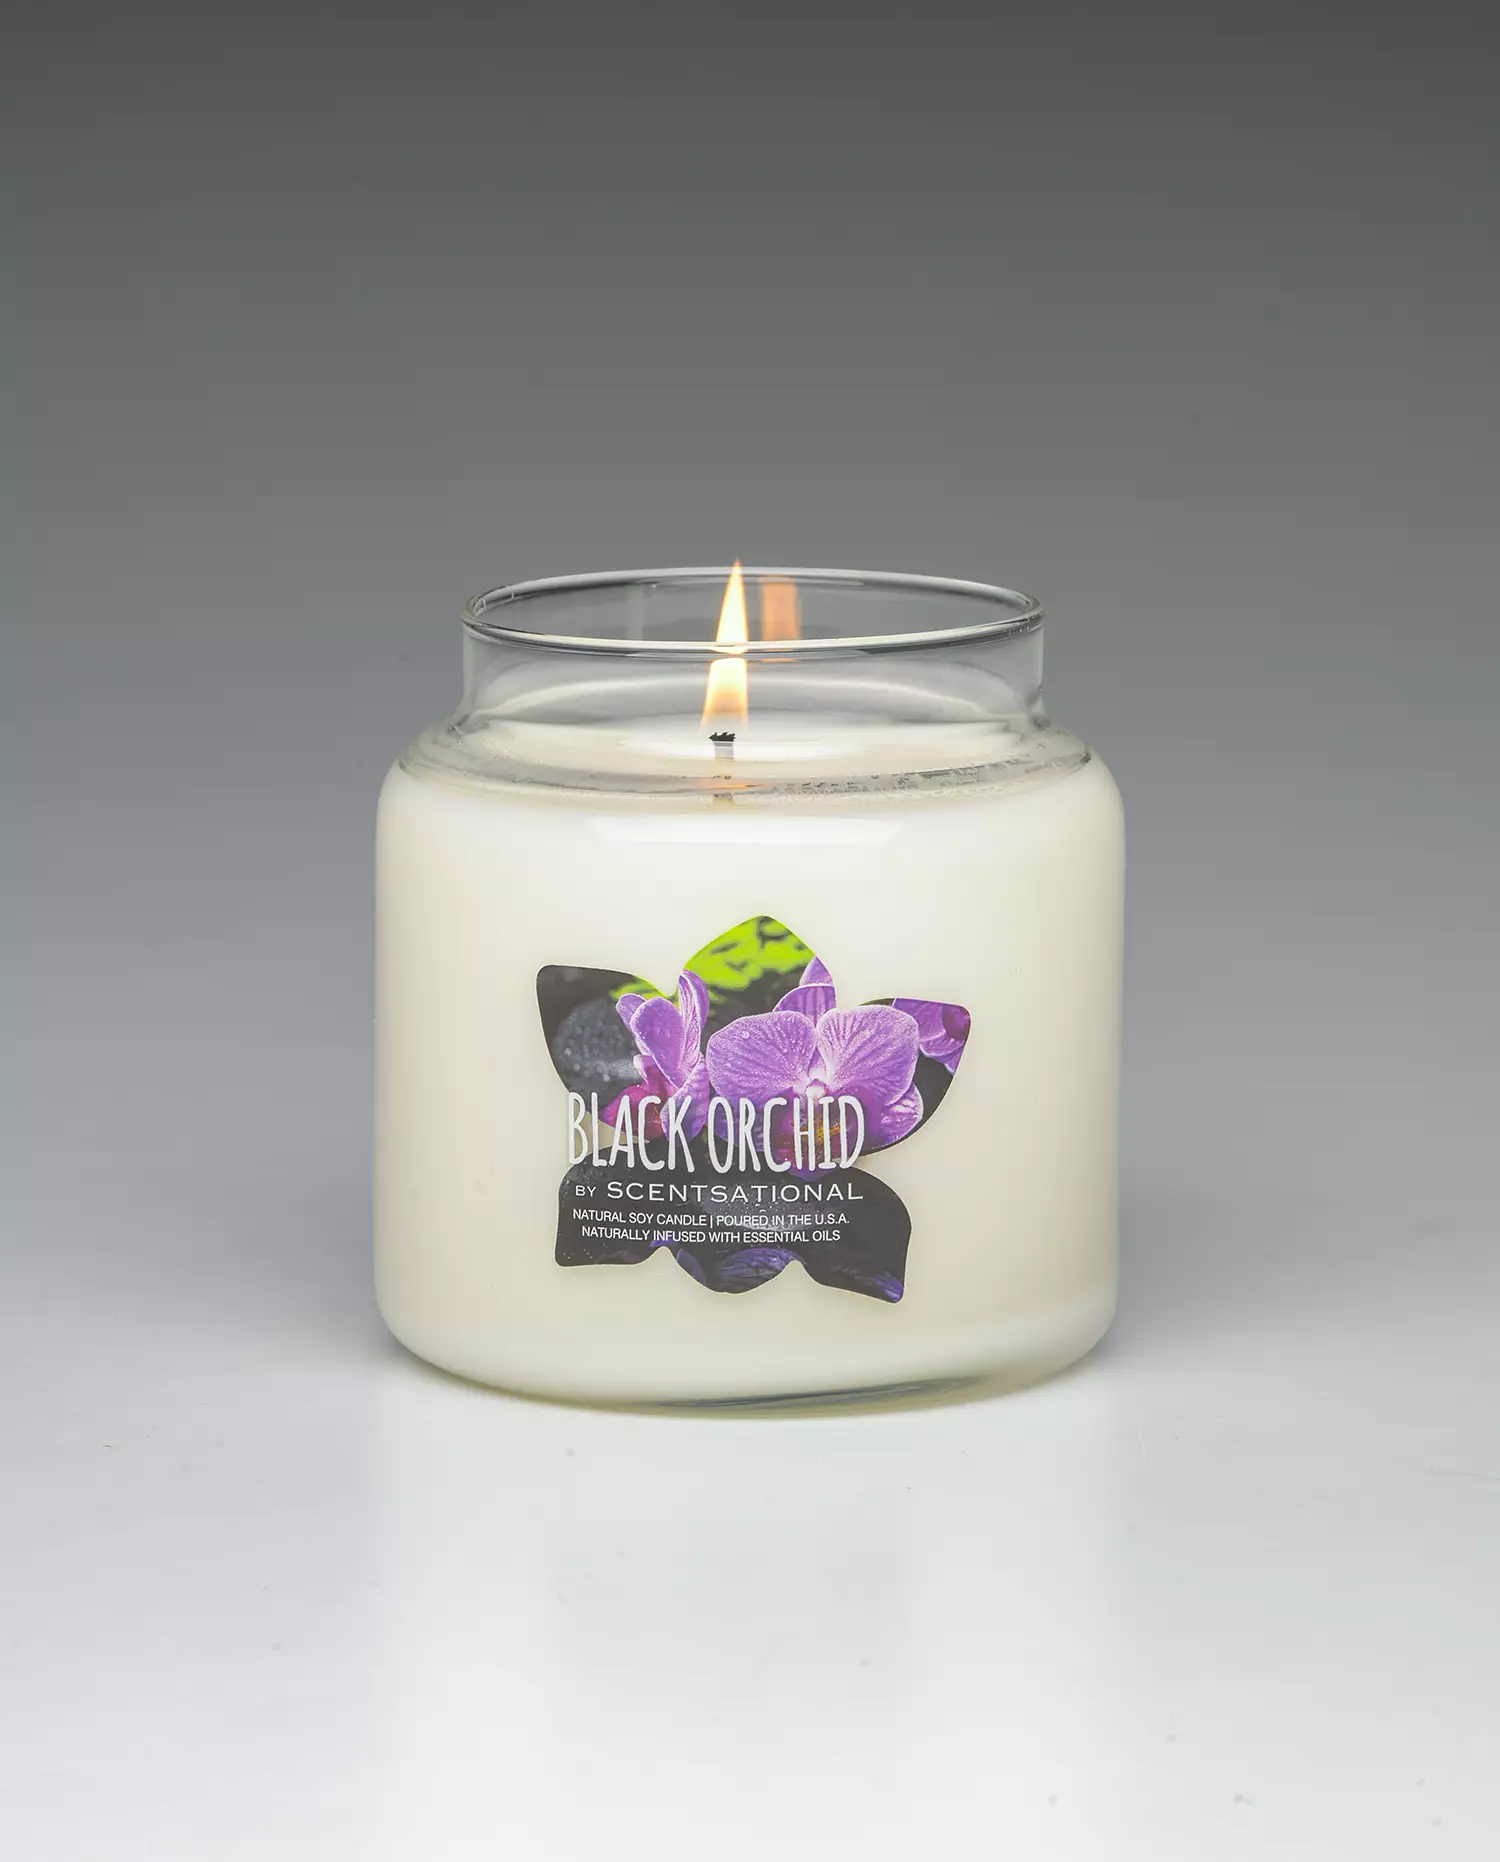 Black Orchid 19oz scented candle burning